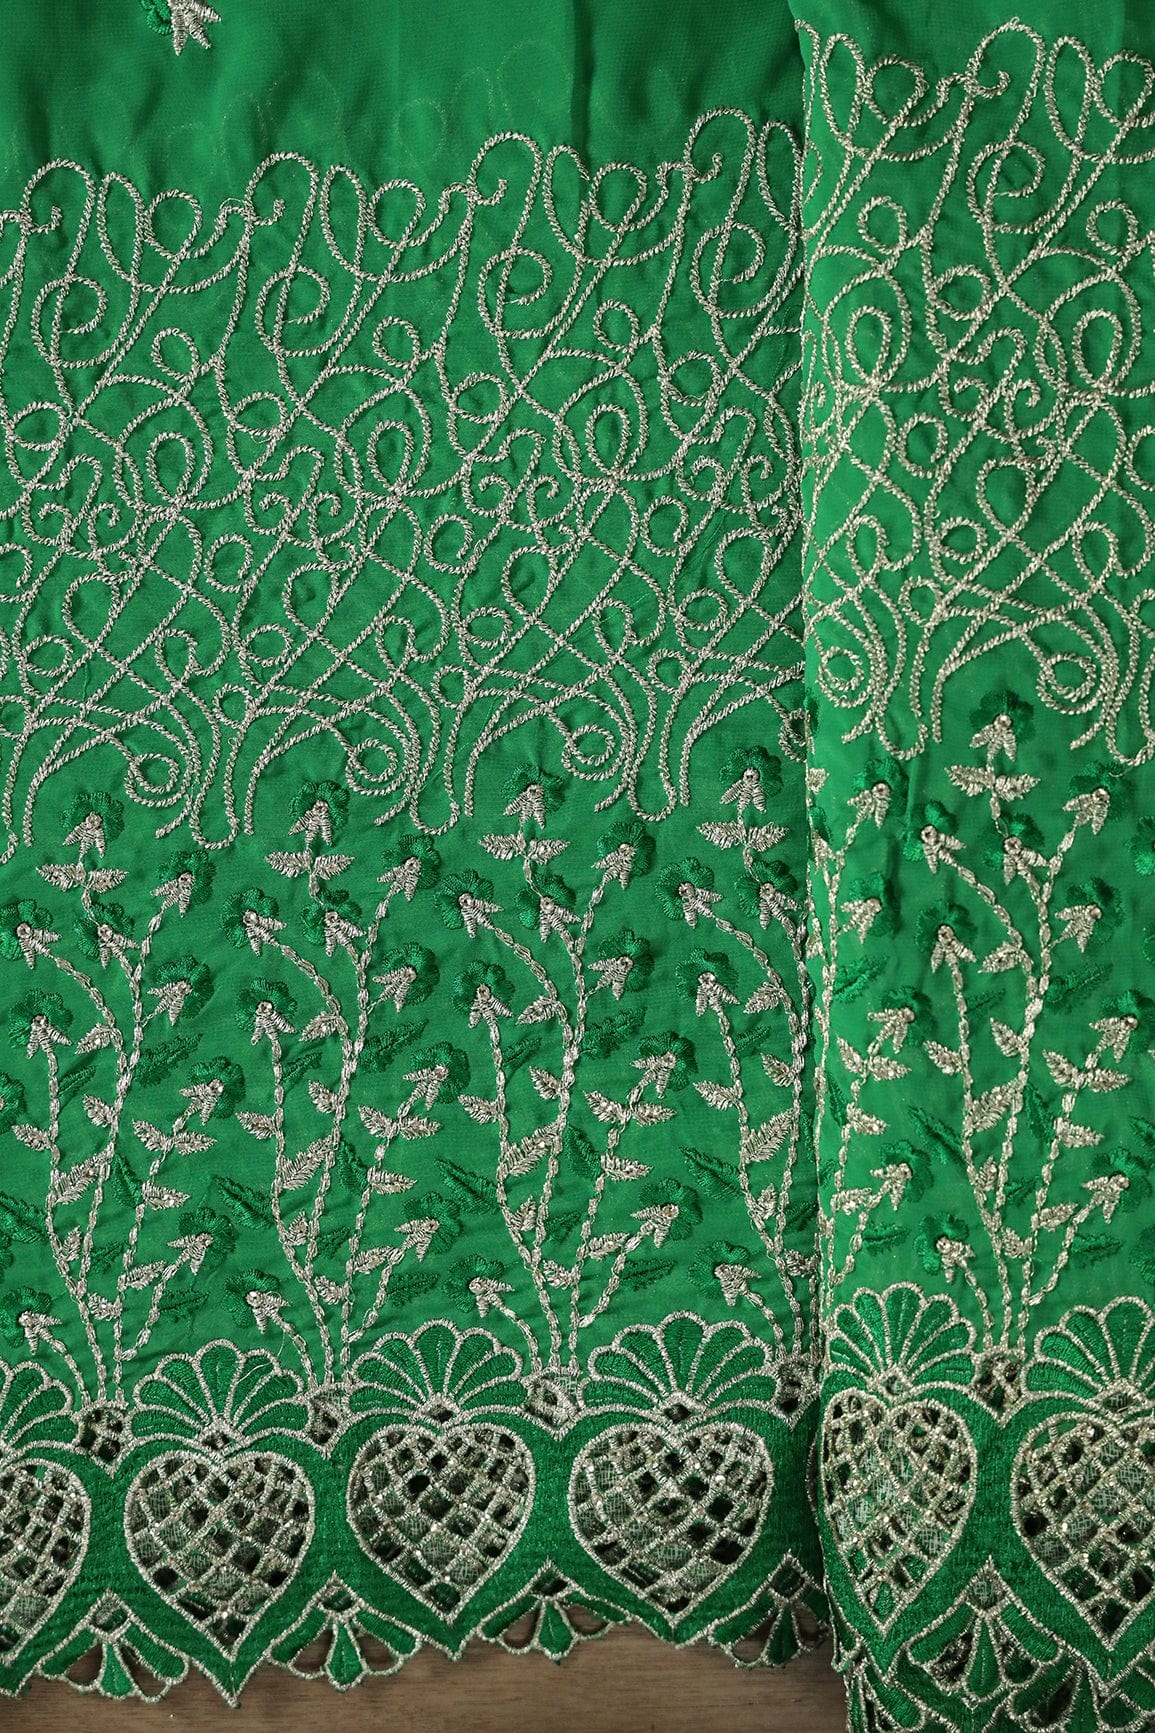 doeraa Embroidery Fabrics Big Width''56'' Green Thread With Zari Floral Embroidery Work On Green Georgette Fabric With Border